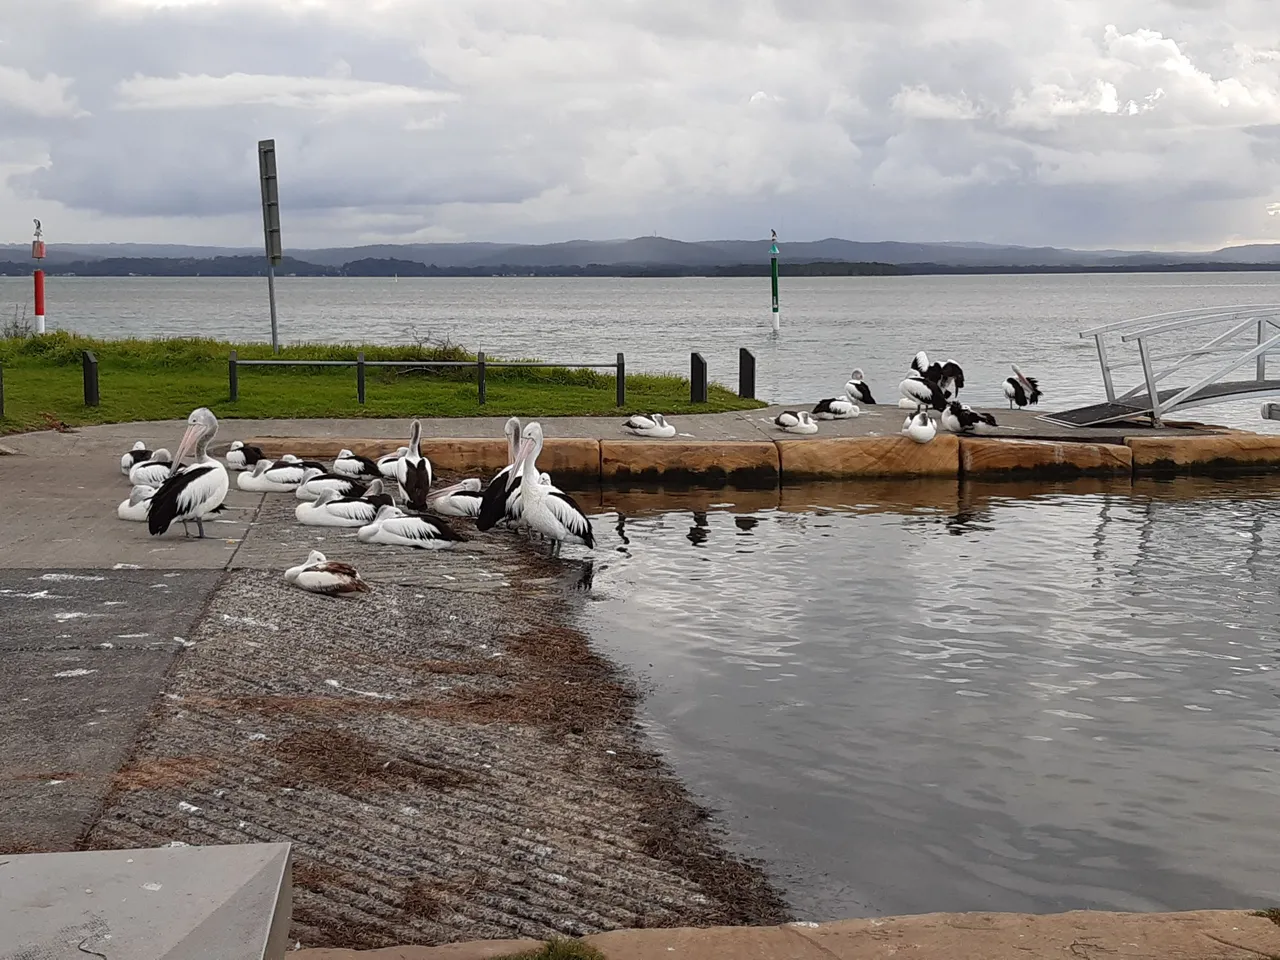 Pelicans at The Entrance